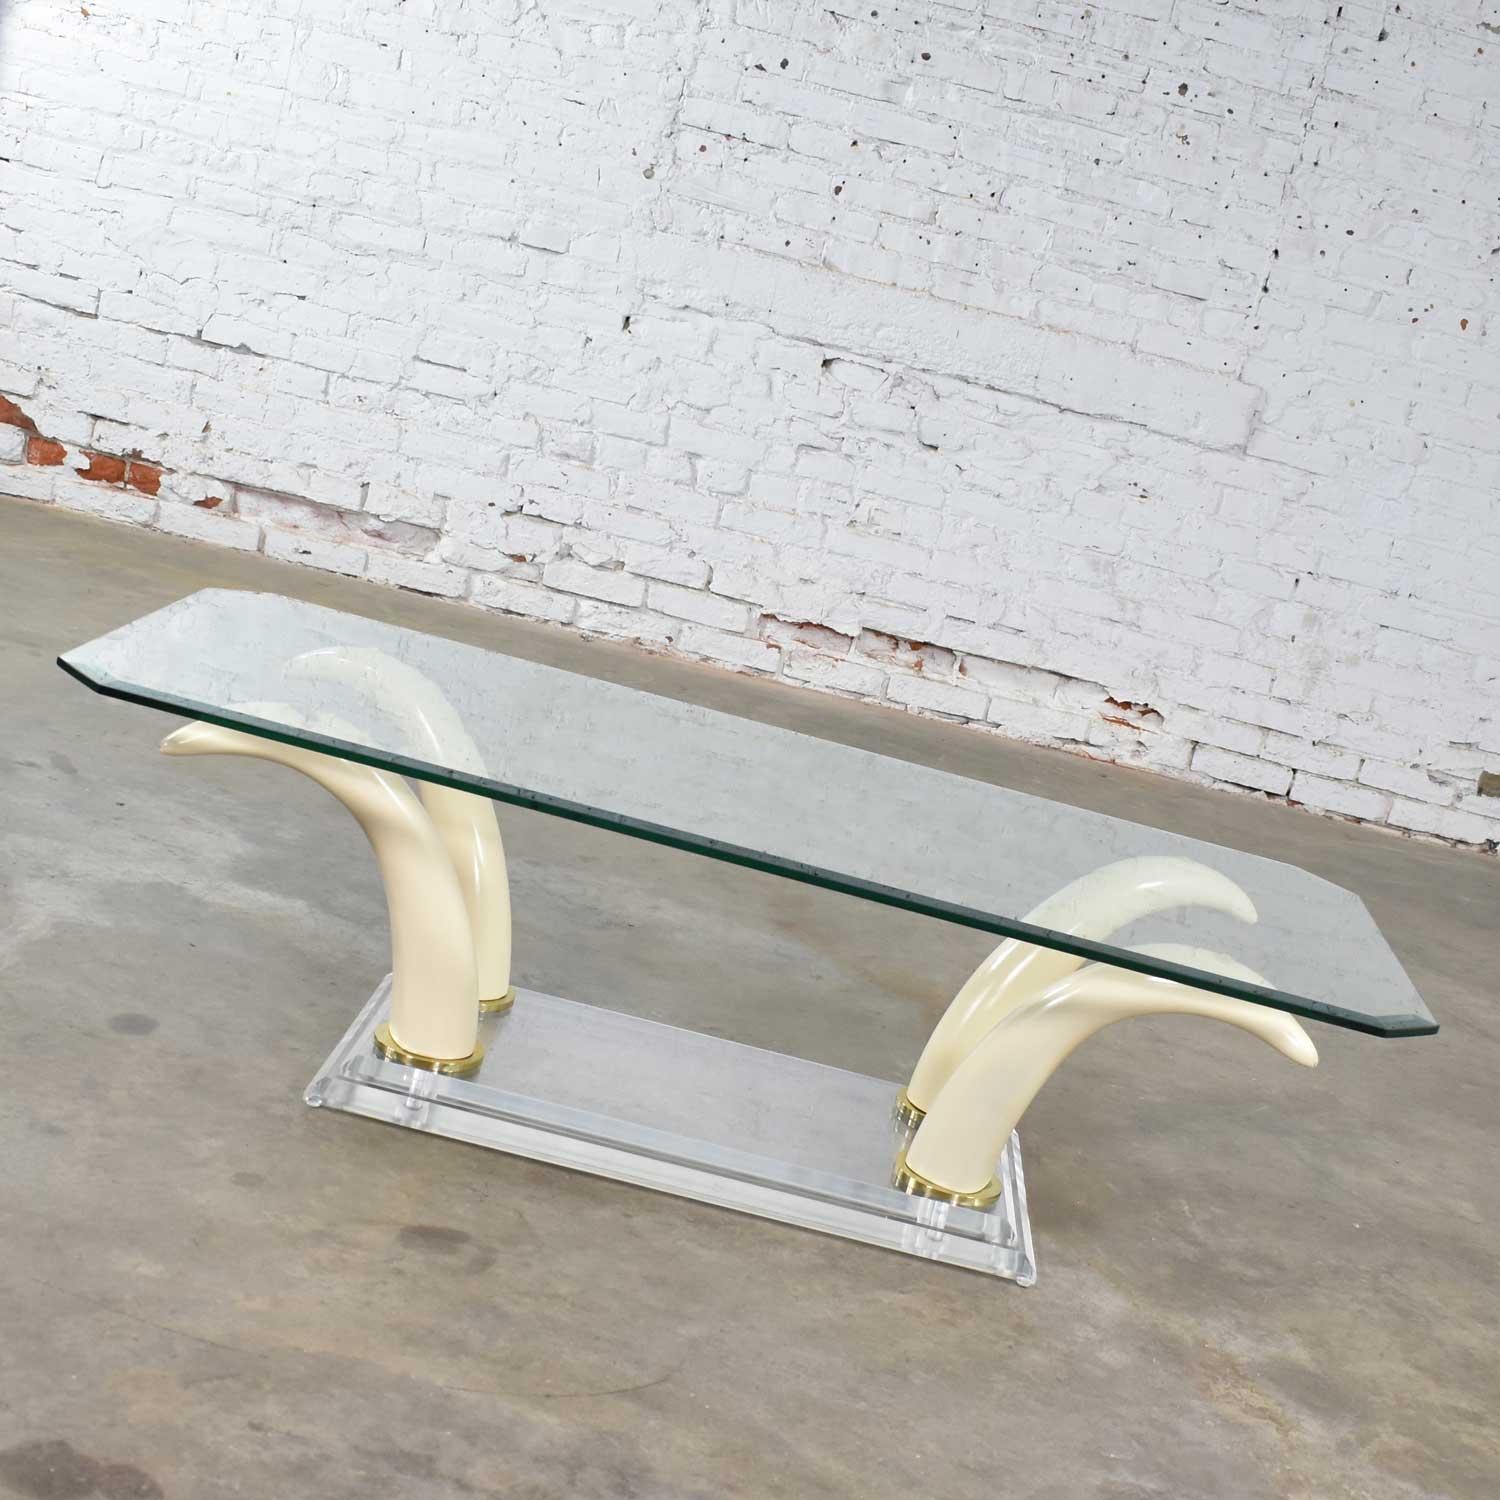 Uniquely handsome Hollywood Regency coffee or cocktail table with Lucite and acrylic faux tusk base and glass top in the style of Maison Jansen for Ralph Pucci or Italo Valenti. It is in wonderful vintage condition with no outstanding flaws. There